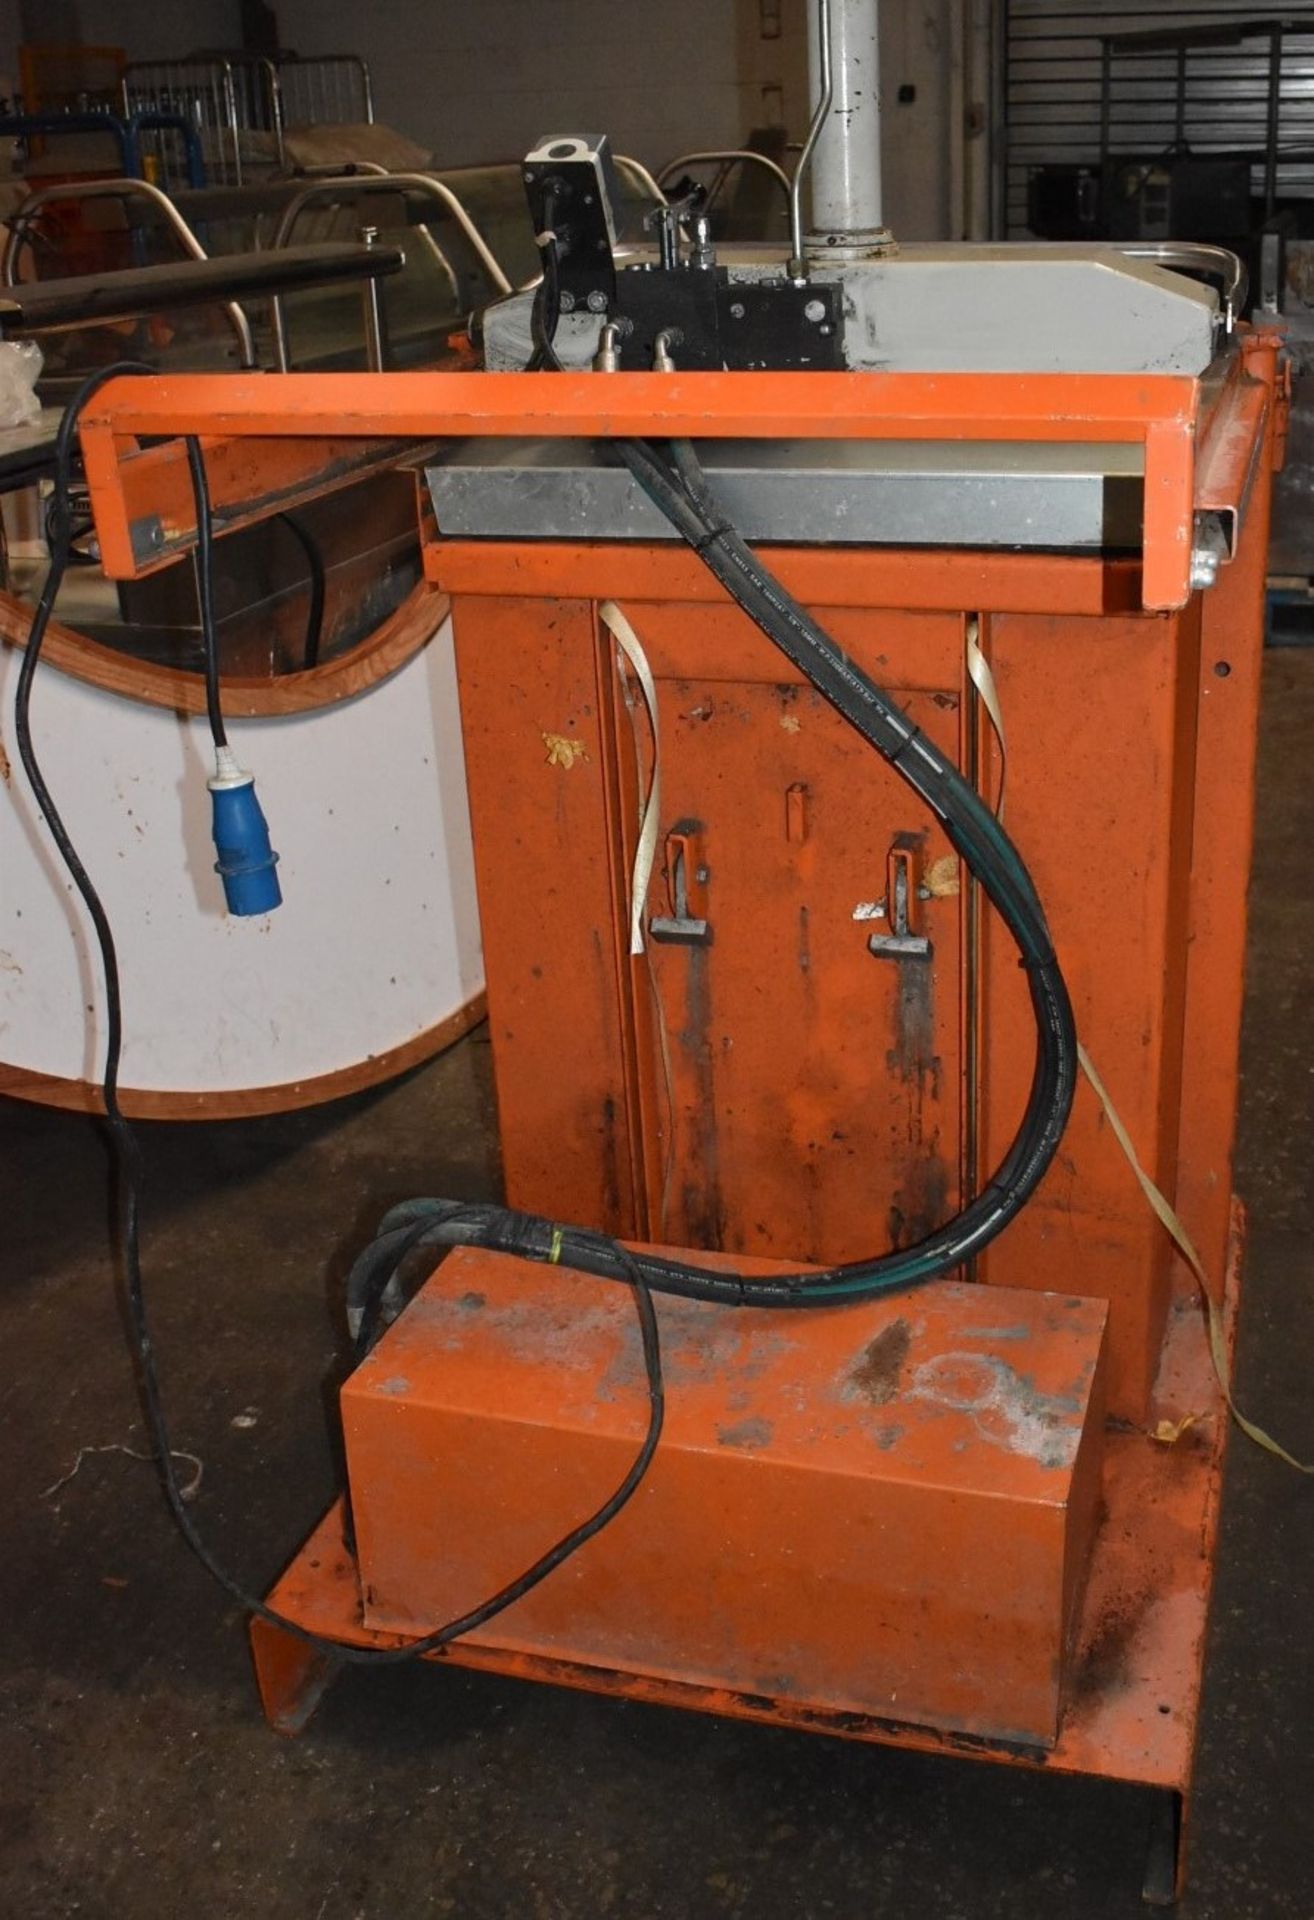 1 x Orwak 5010 Hydraulic Press Compact Cardboard Baler - Used For Compacting Recyclable or Non- - Image 6 of 15